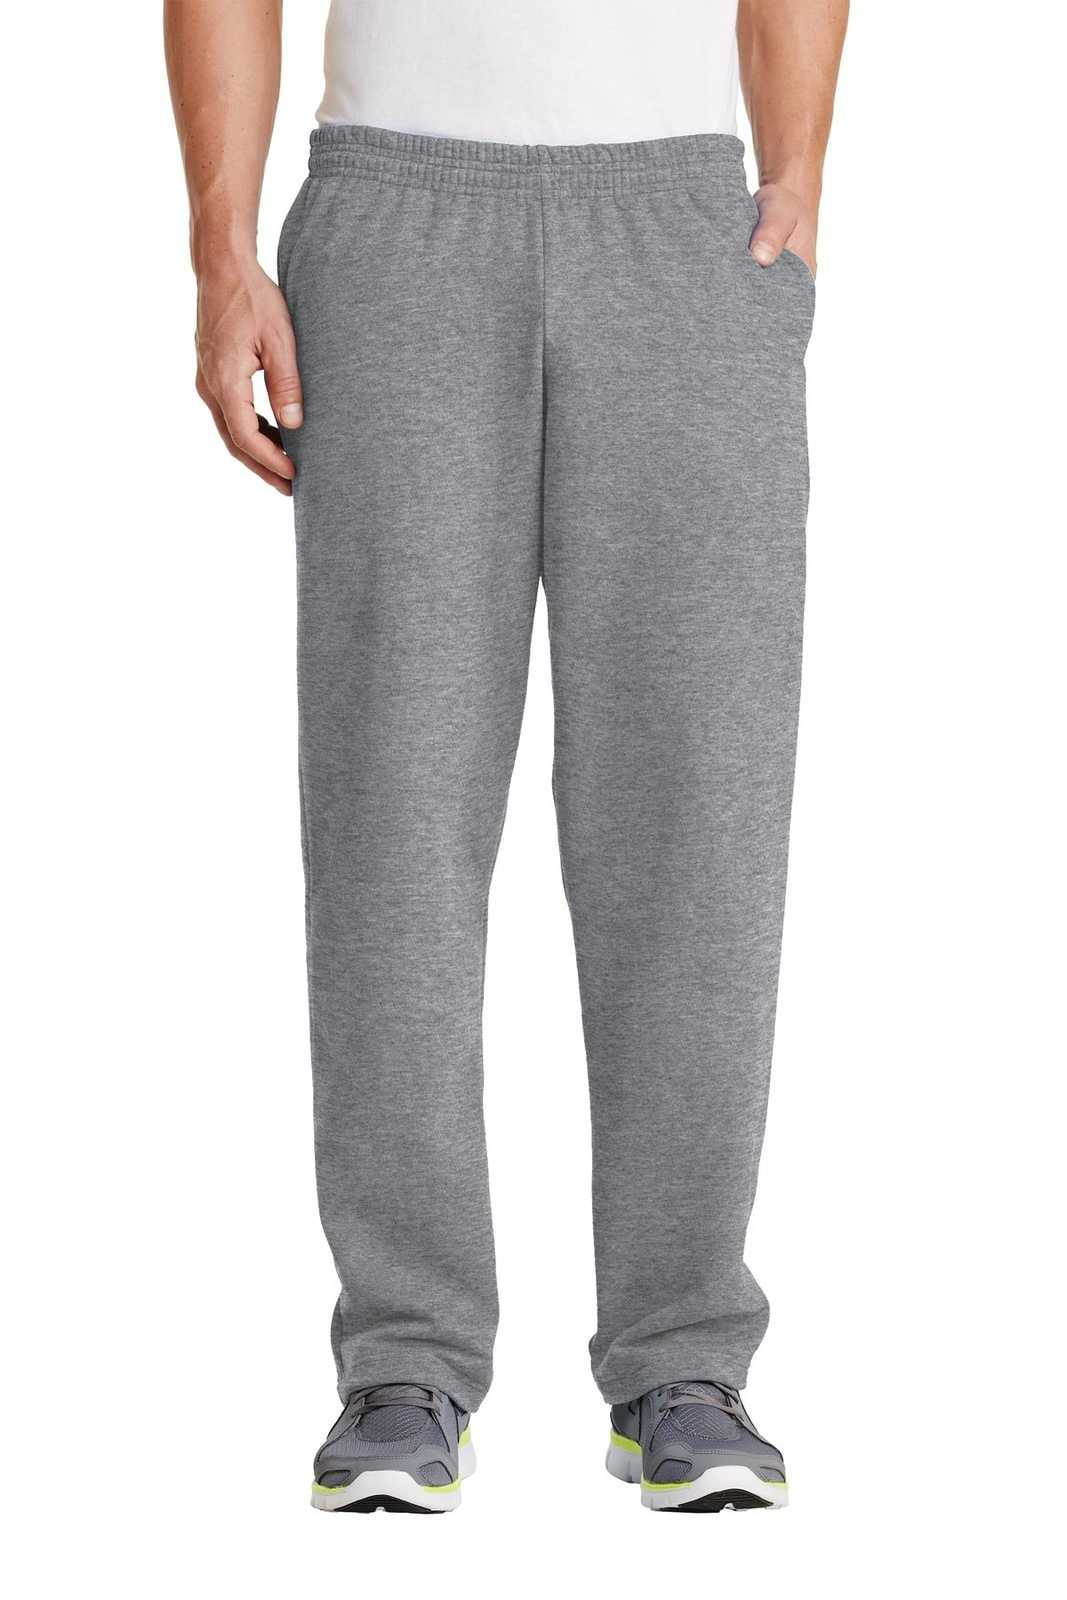 Port & Company PC78P Core Fleece Sweatpant with Pockets - Athletic Heather - HIT a Double - 1